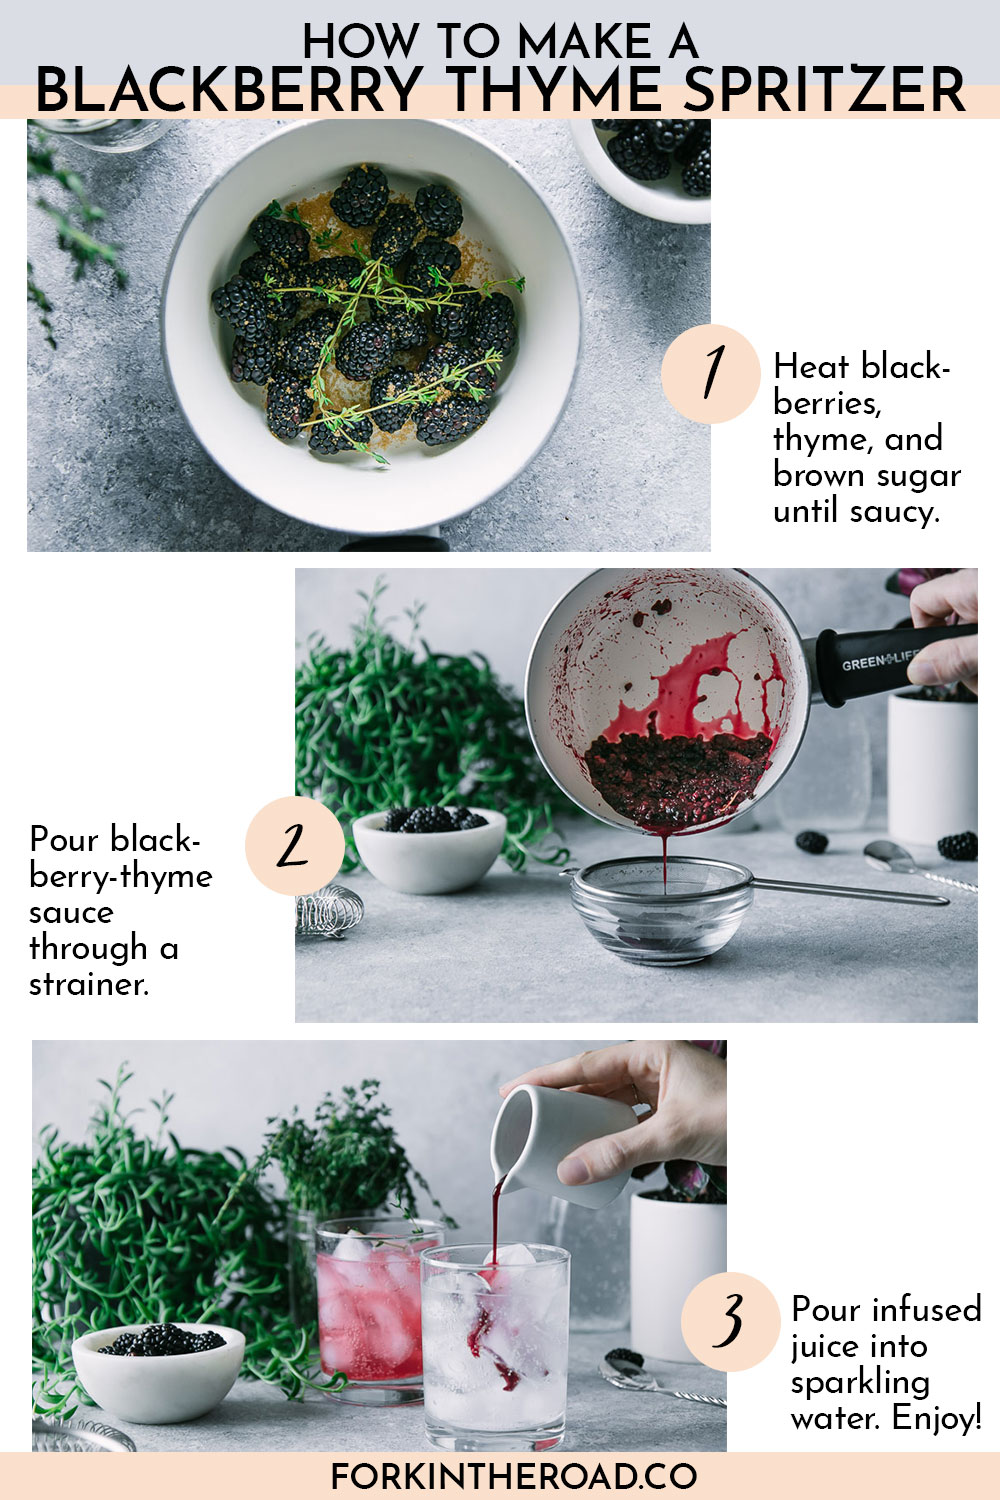 step-by-step photos of how to make an fruit and herb infused sparkling water, a Blackberry Thyme Spritzer